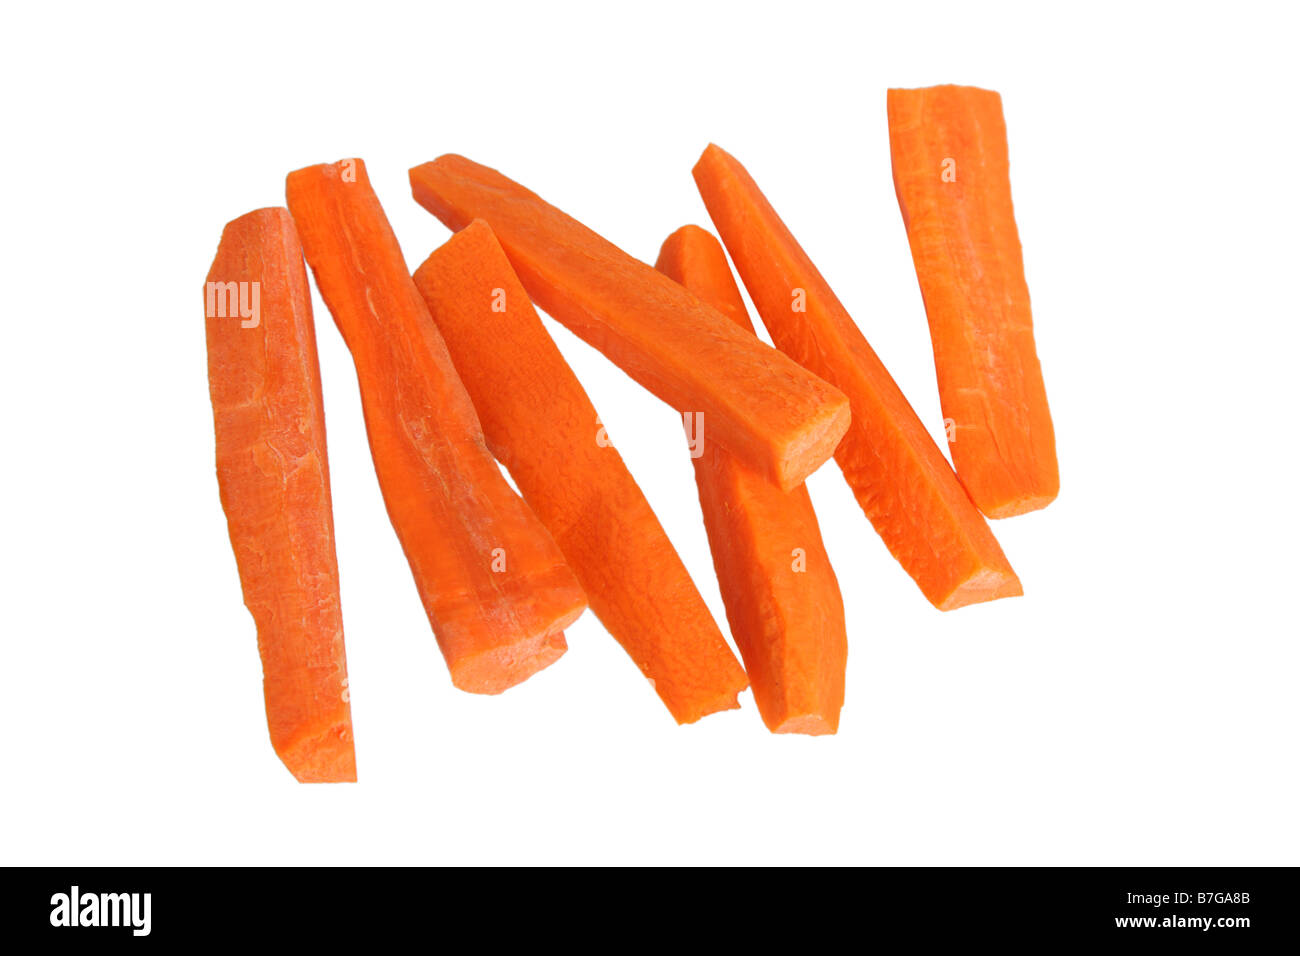 Carrot sticks cut out on white background Stock Photo